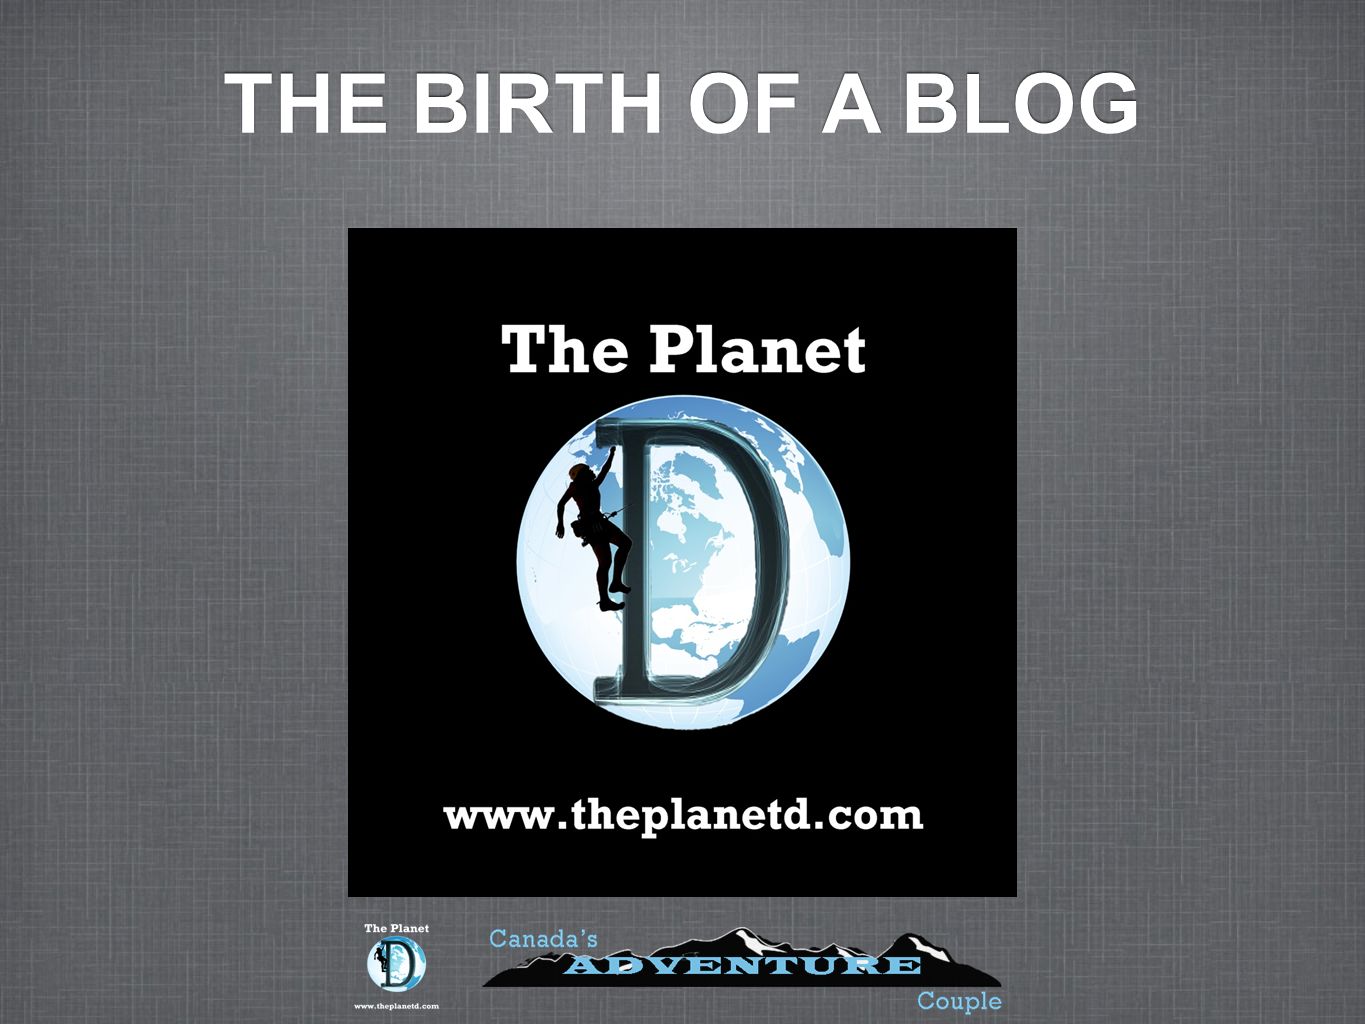 THE BIRTH OF A BLOG